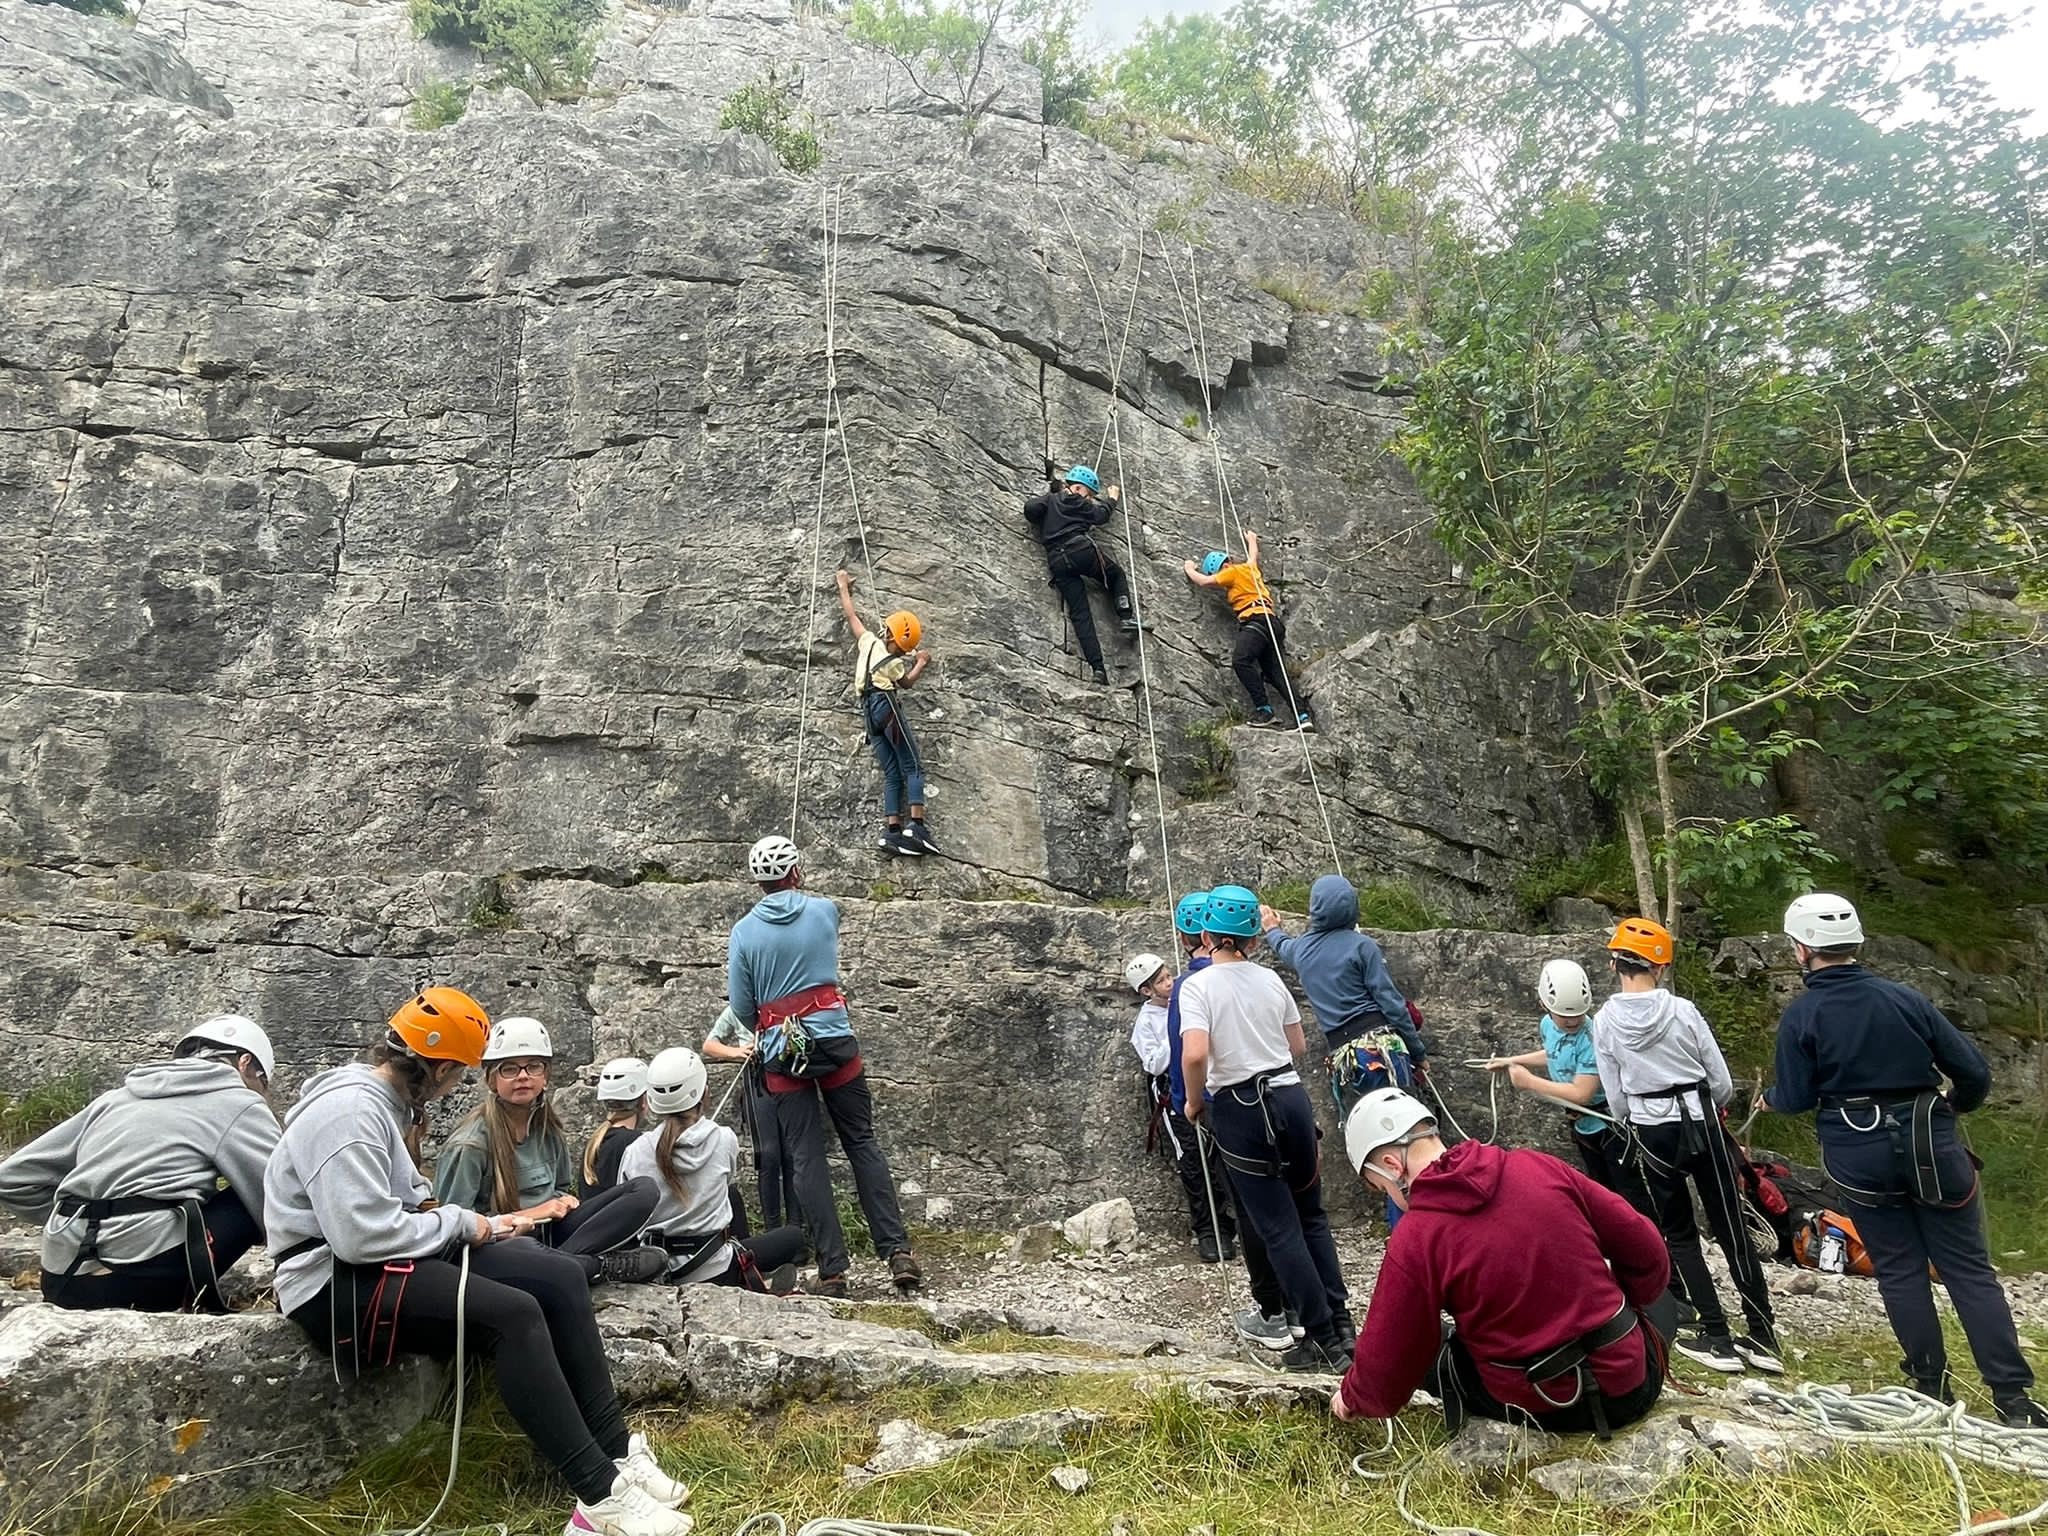 Students take turns to scale the rocks.